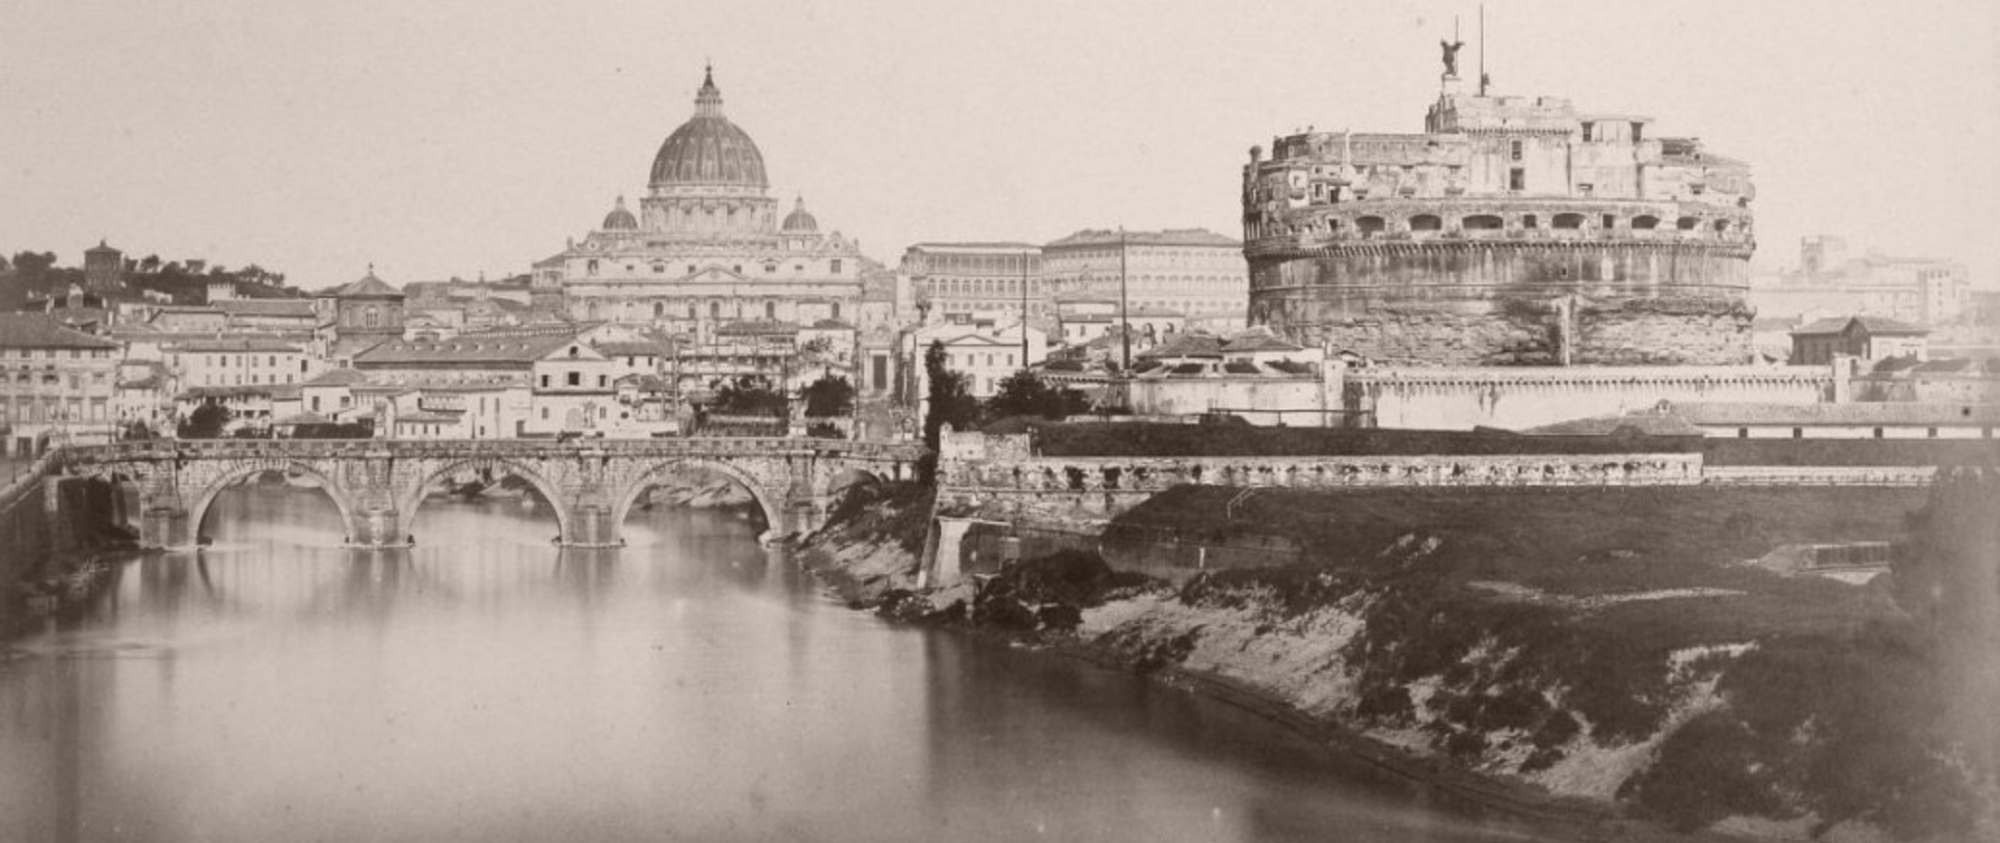 Tiber with Castel Sant’Angelo and St. Peter’s Basilica, Rome